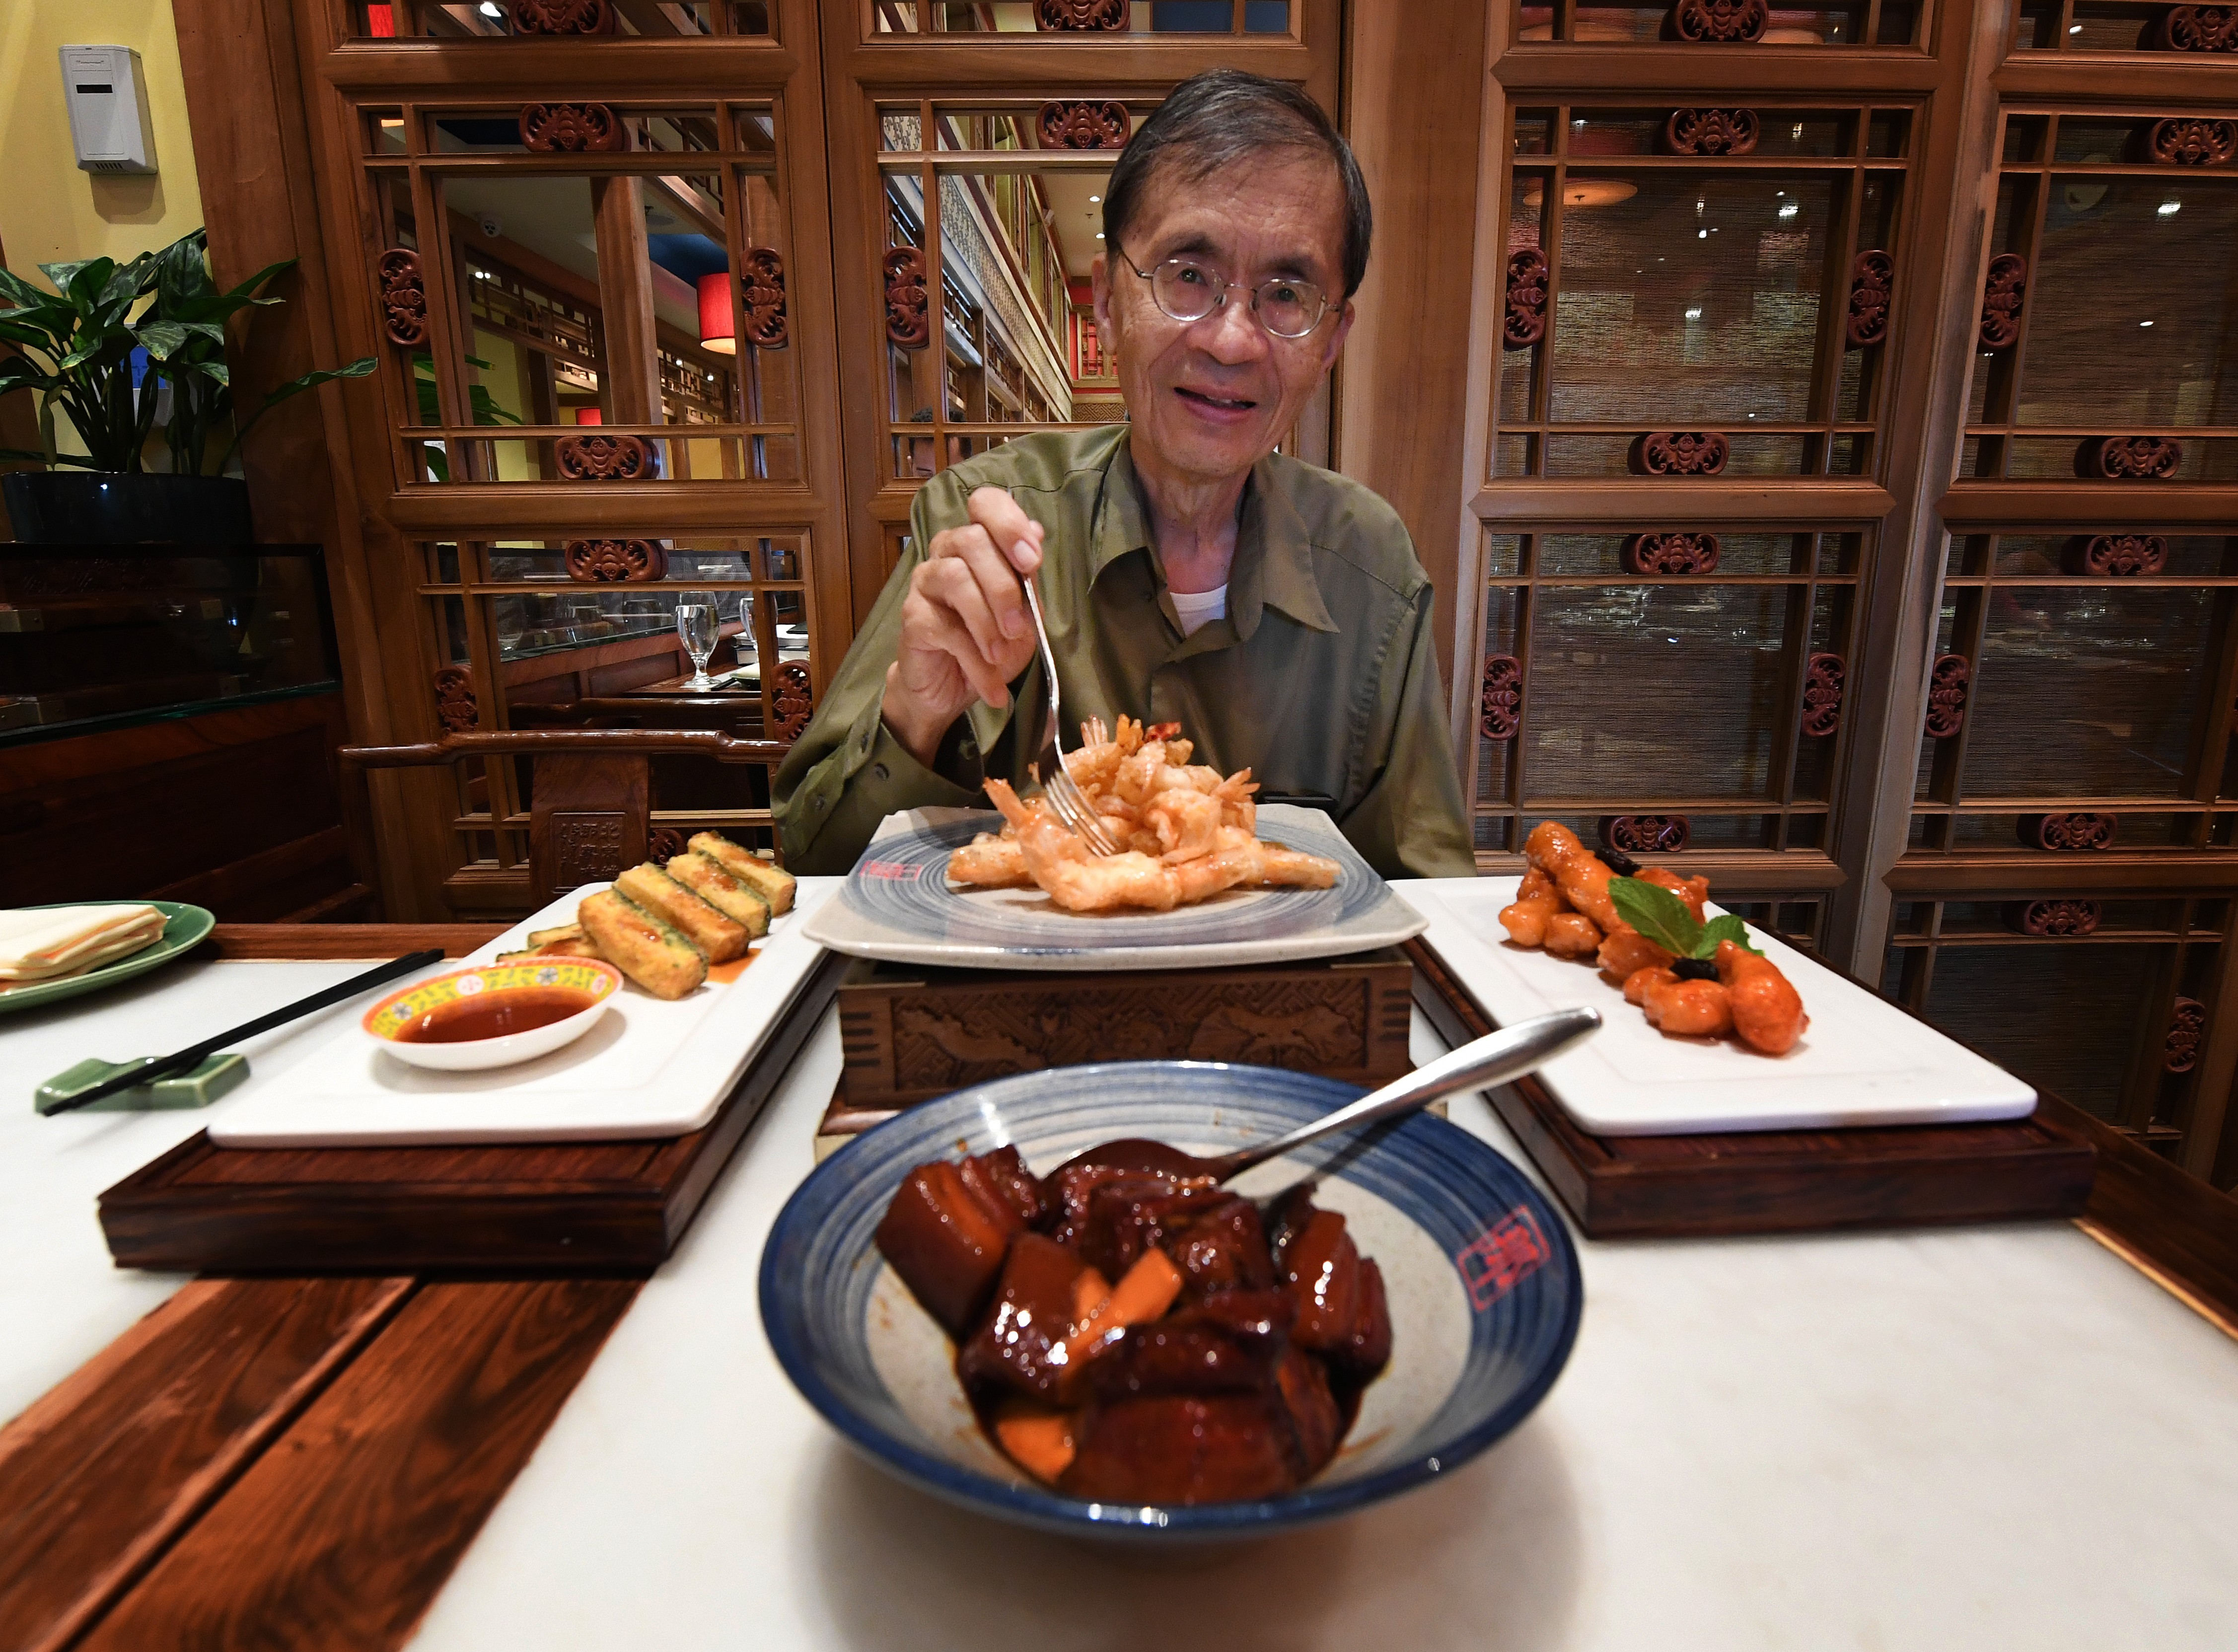 David R. Chan’s love of lists and determination never to eat at the same place twice has seen him become an accidental expert on Chinese-American history. Just don’t call him a foodie